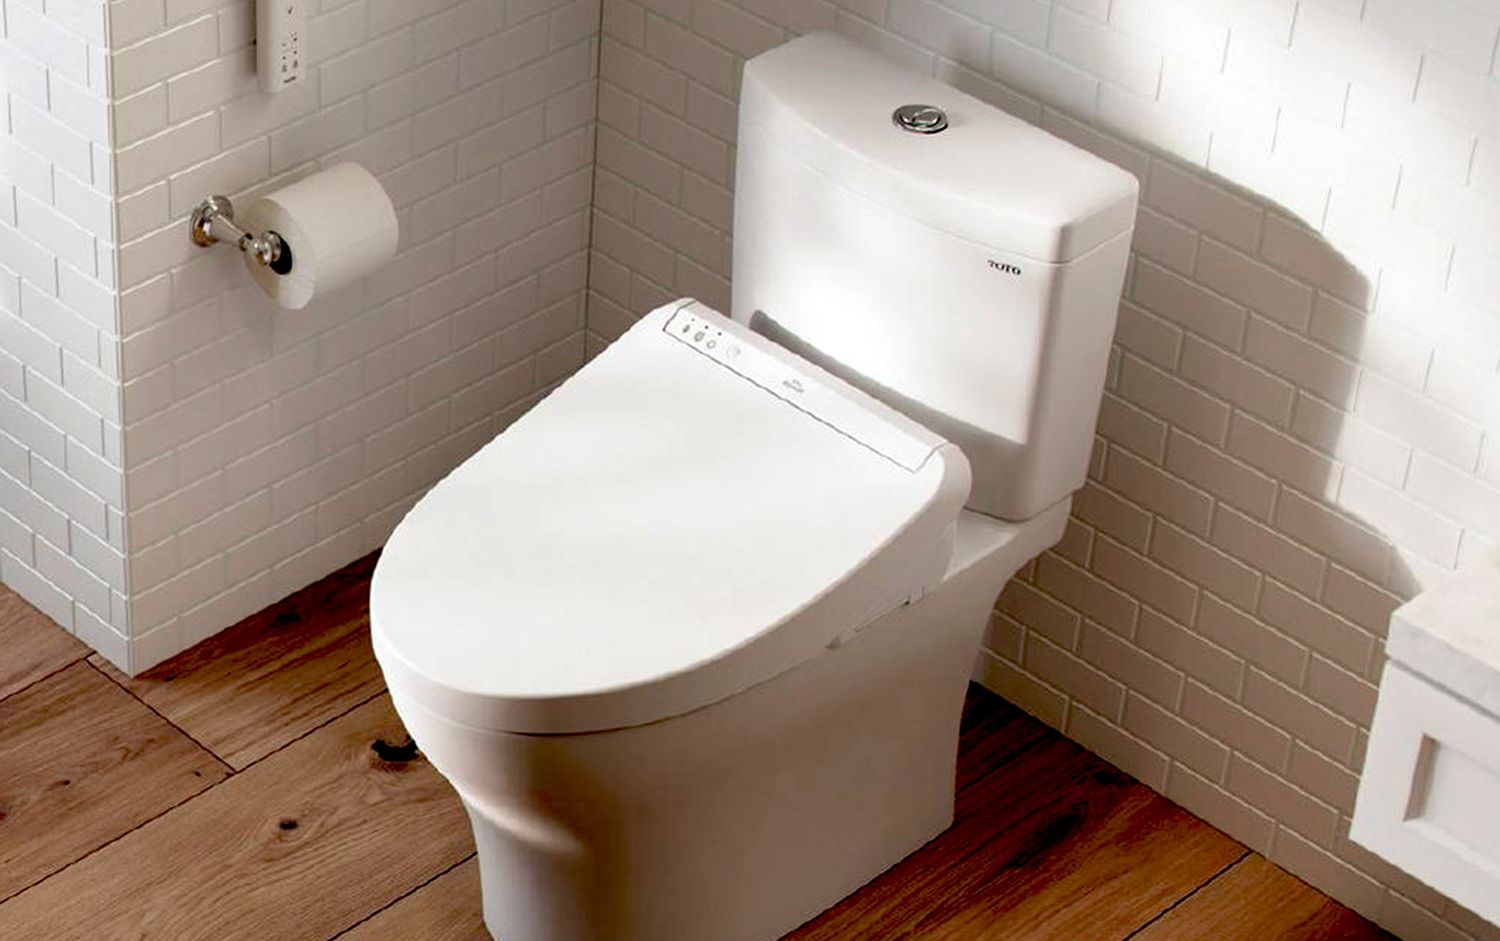 TOTO Electric Bidet in a bathroom with a wooden floor